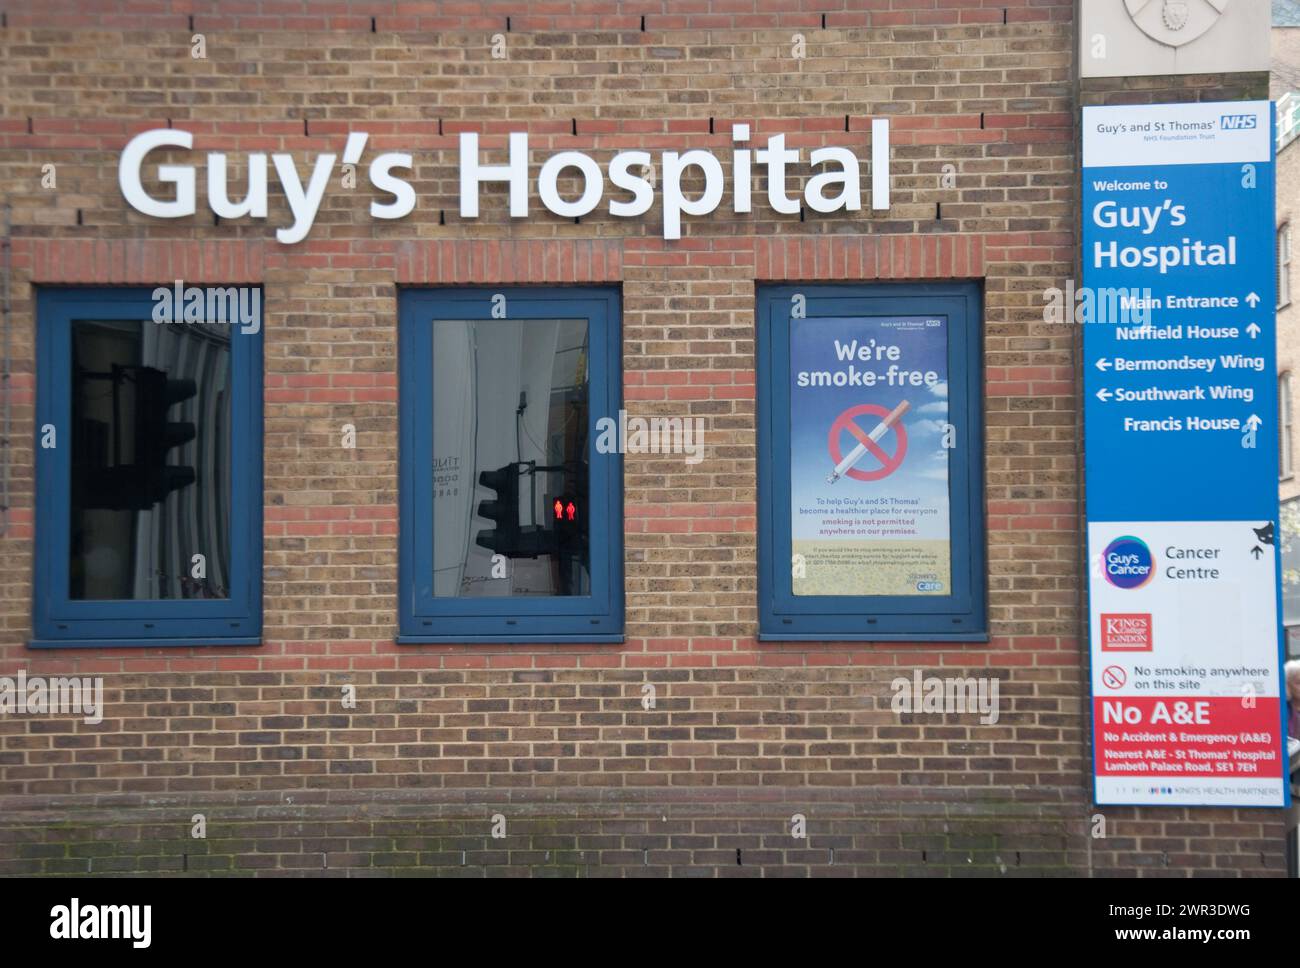 Guy's Hospital, Southwark, London, UK - notice boards, teaching hospital, directions for various sections of the hospital. Stock Photo